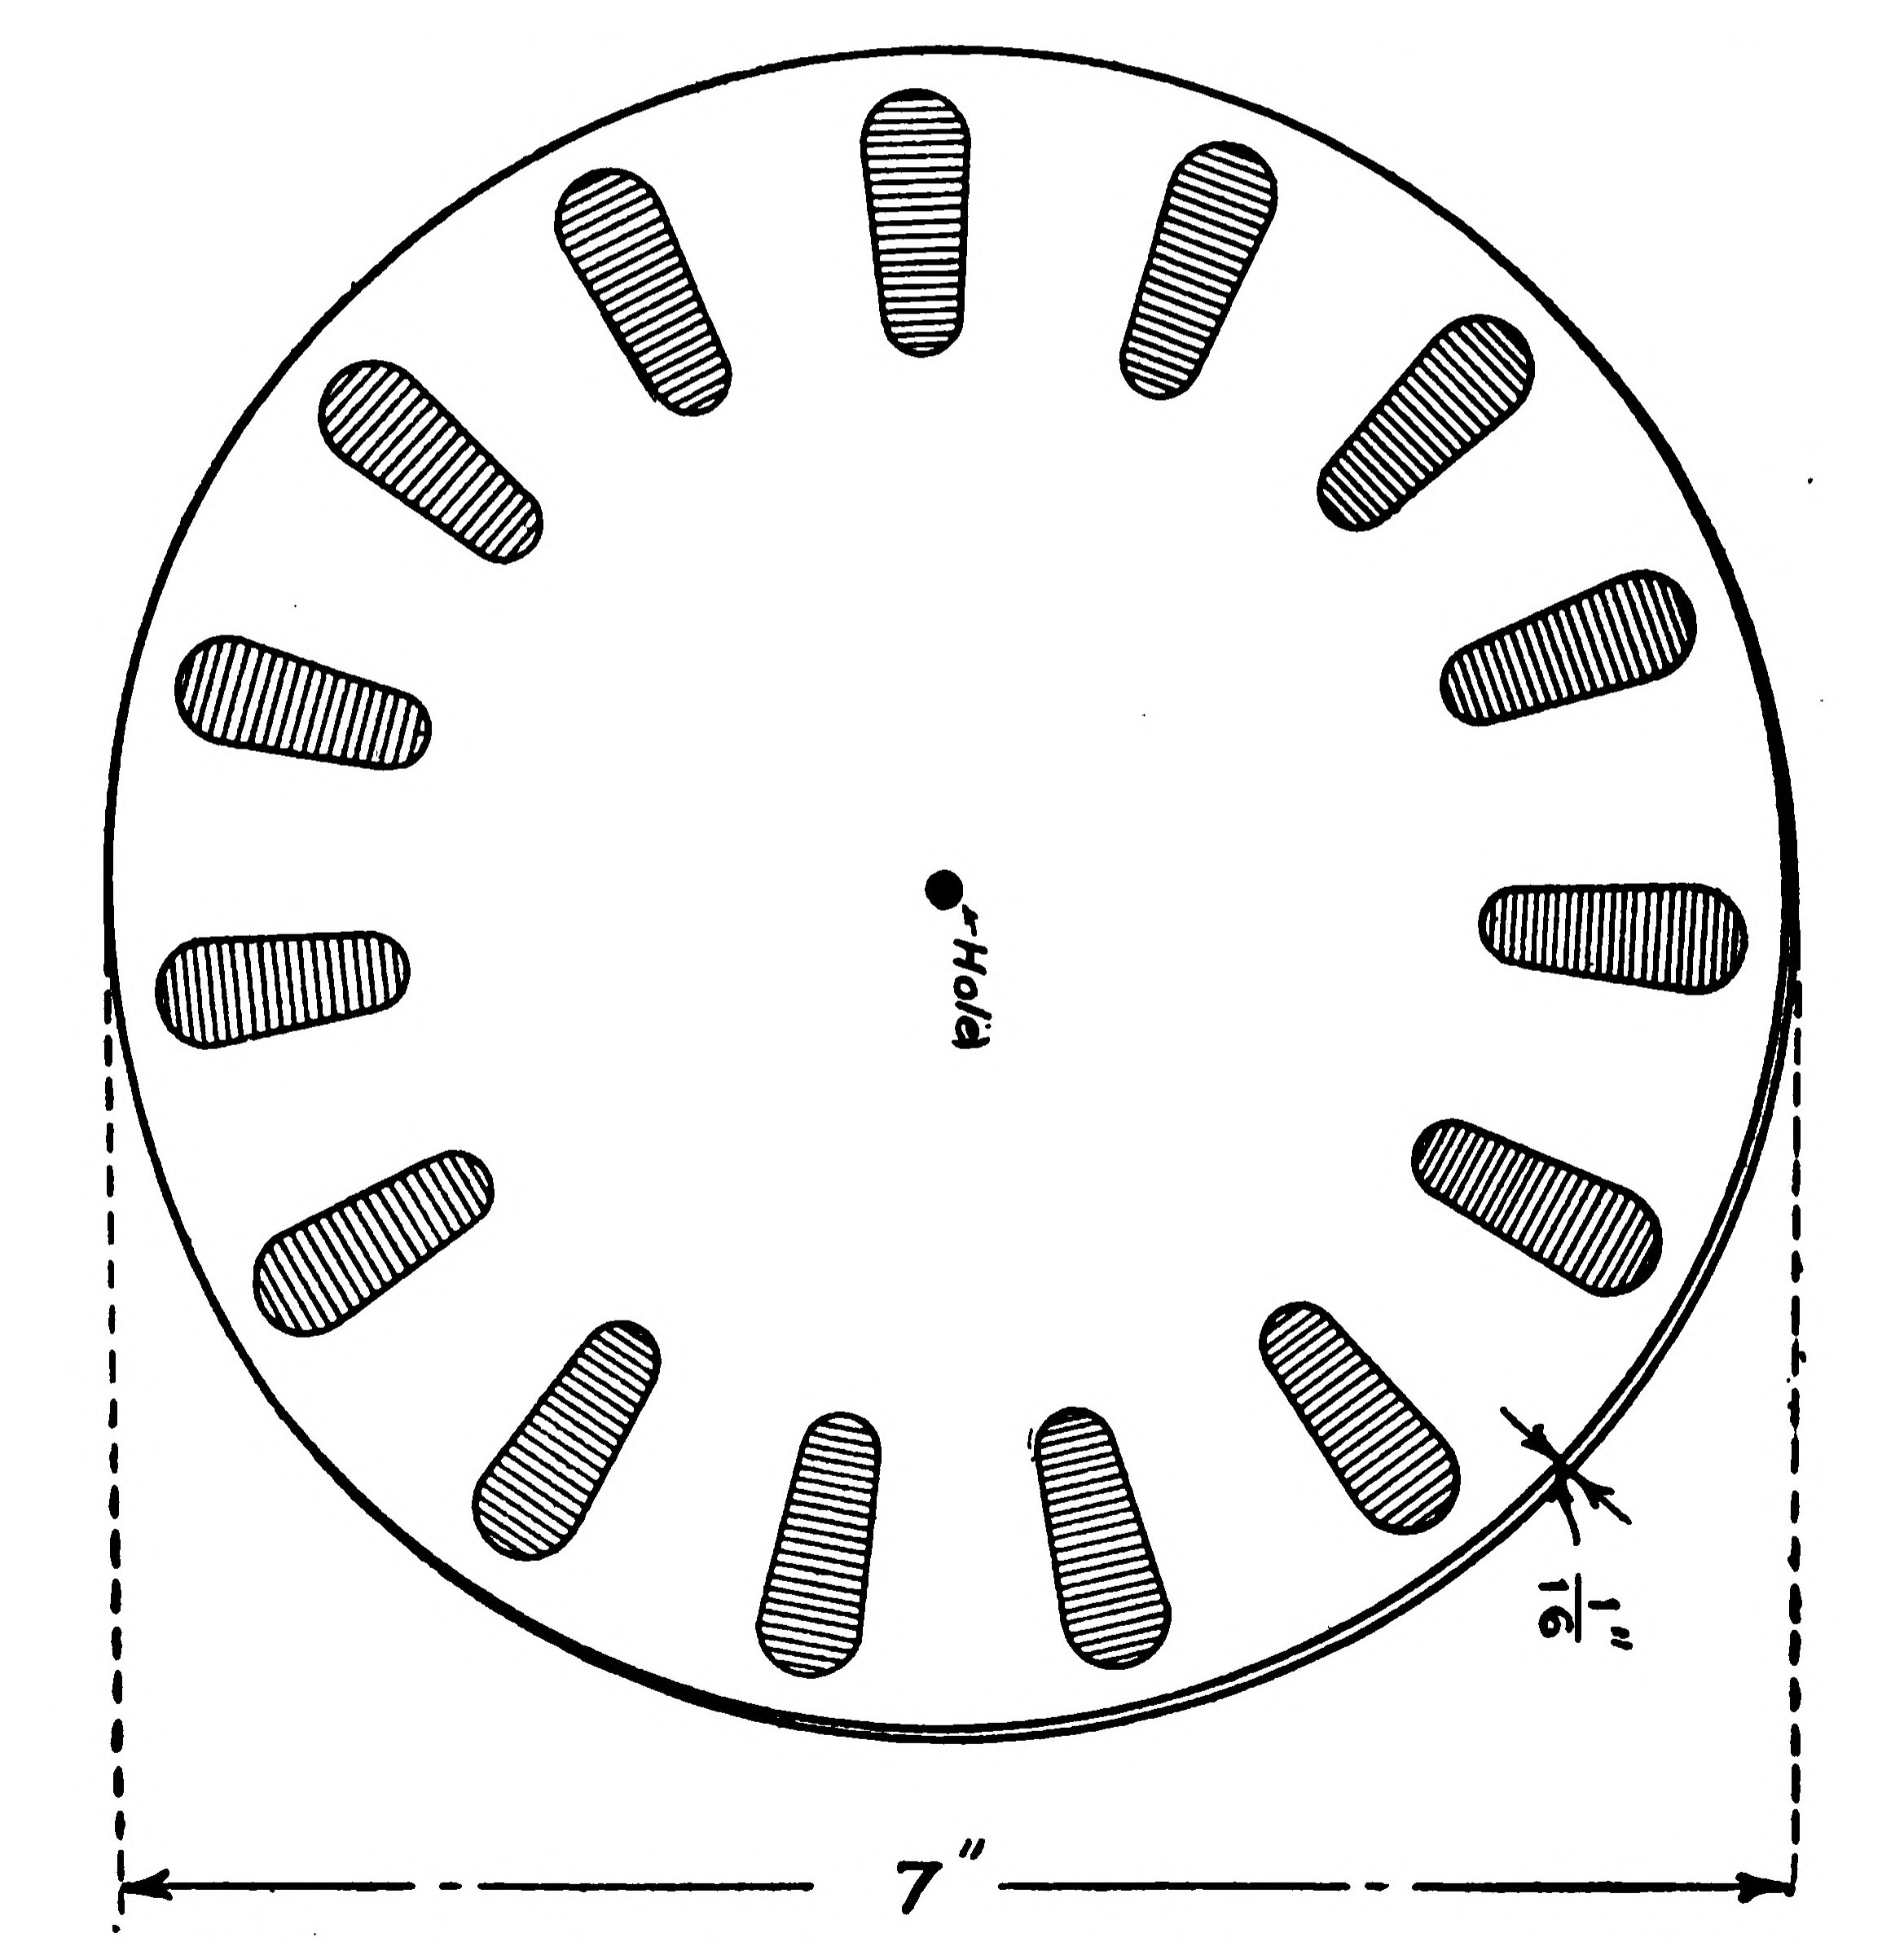 FIG. 2.—The plates for the Static Machine